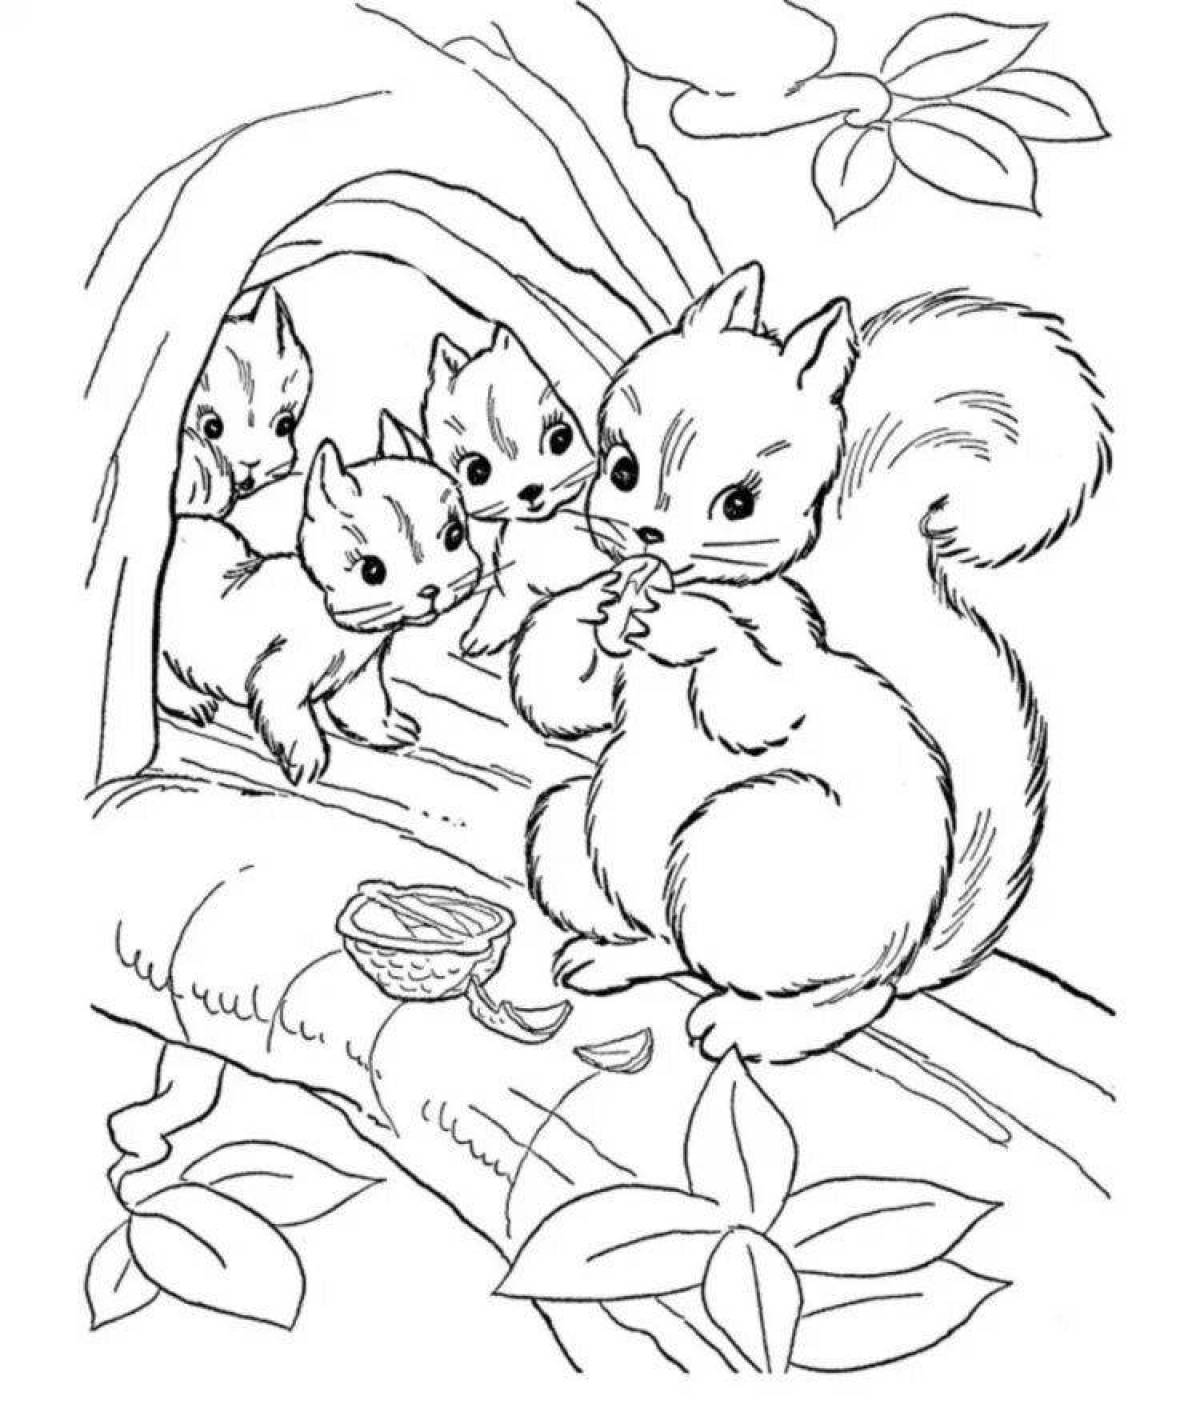 Fancy forest animals coloring book